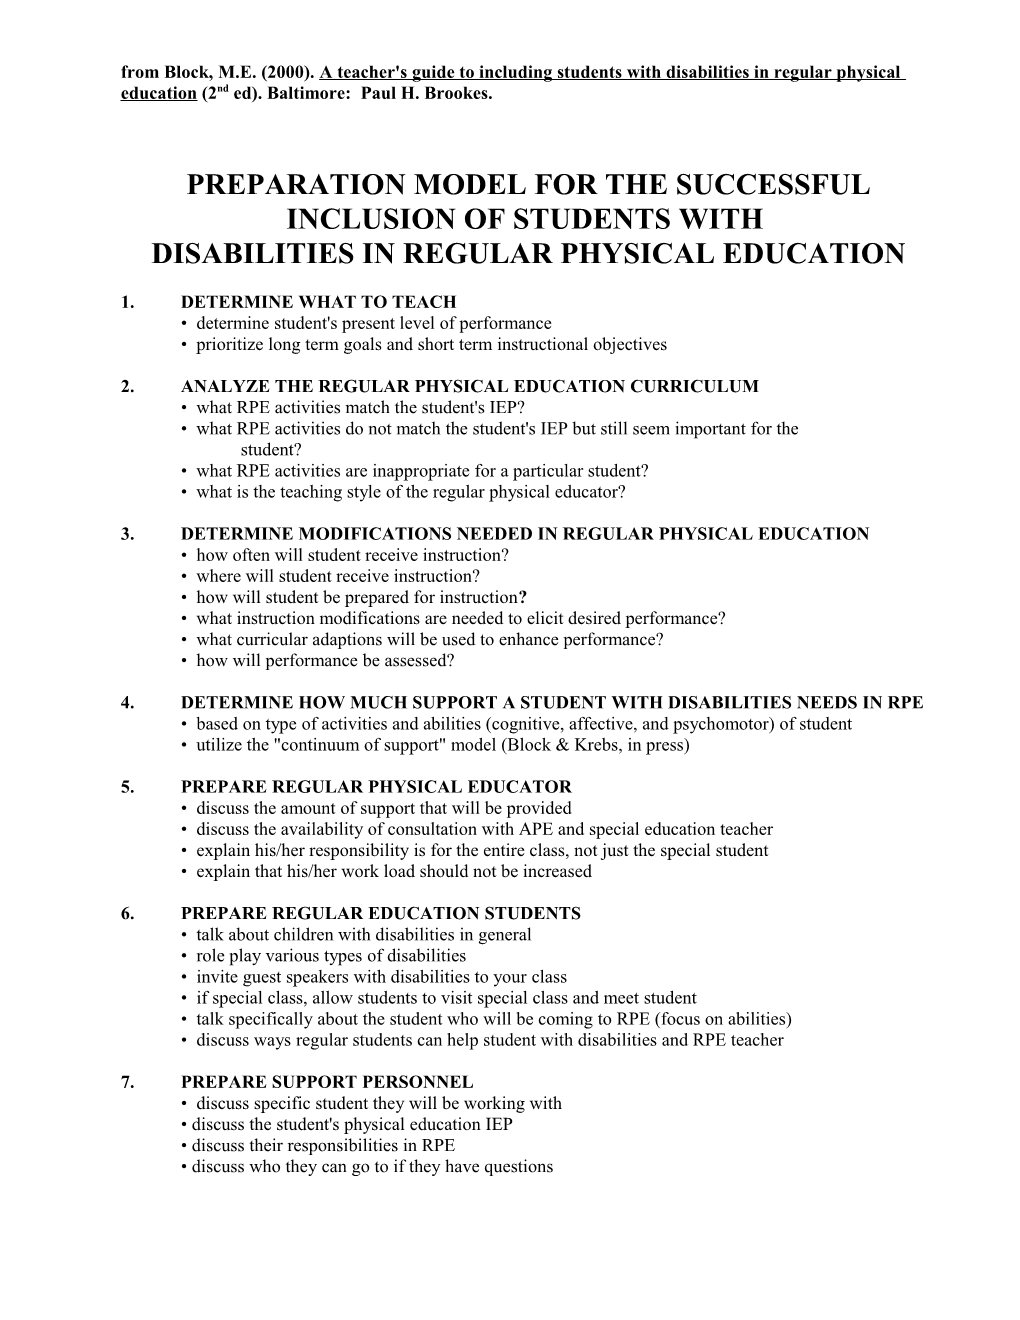 Preparation Model for the Successful Inclusion of Students With